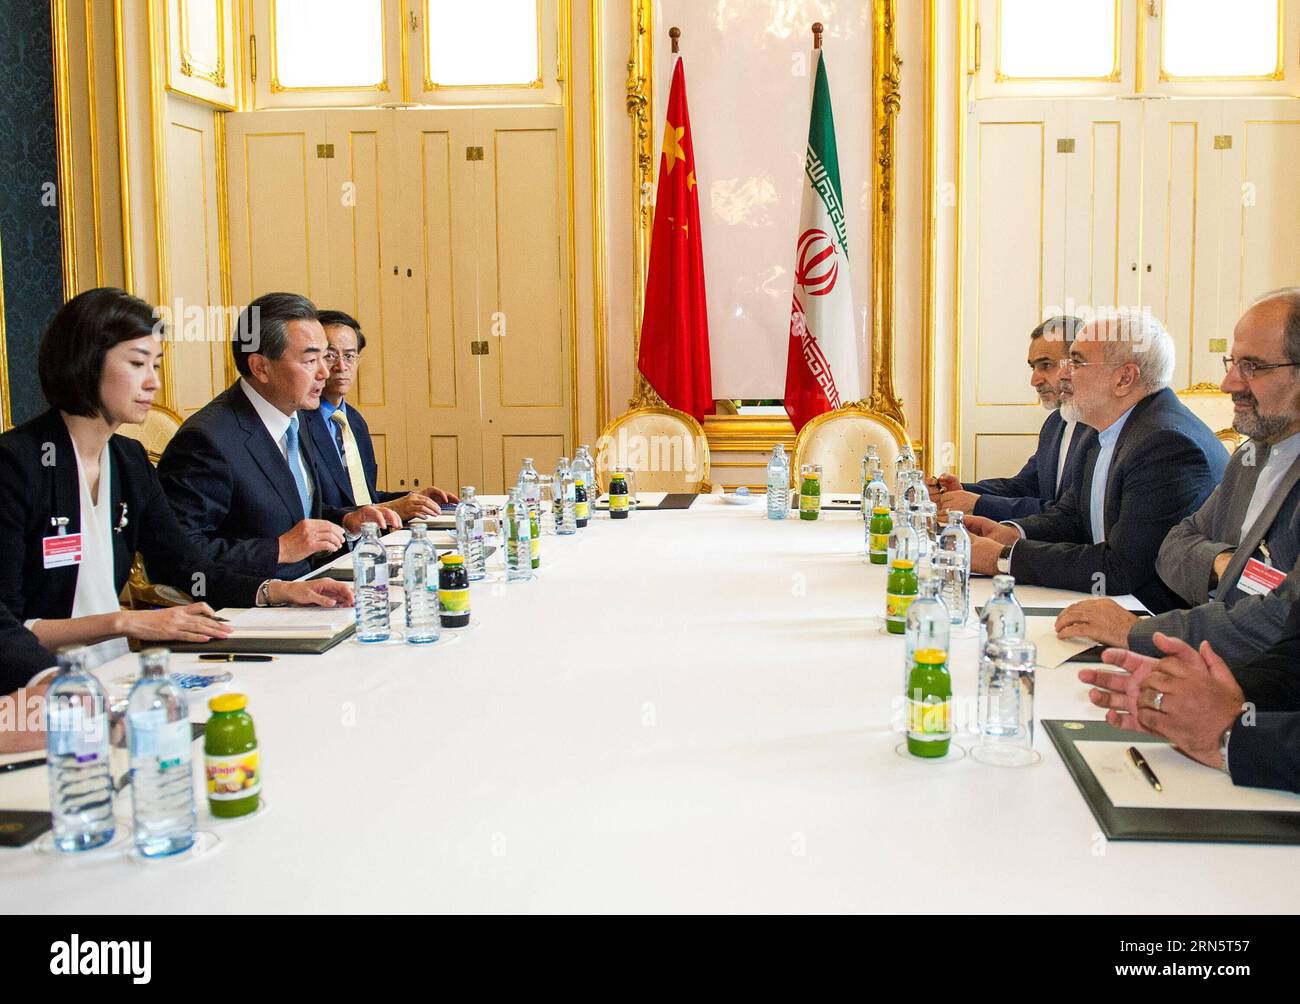 Chinese Foreign Minister Wang Yi(2nd L) meets with Iranian Foreign Minister Javad Zarif(2nd R) during the ongoing nuclear negotiation in Vienna, Austria, on July 2, 2015. ) AUSTRIA-VIENNA-CHINA-IRAN-FM-MEETING QianxYi PUBLICATIONxNOTxINxCHN   Chinese Foreign Ministers Wang Yi 2nd l Meets With Iranian Foreign Ministers Javad Zarif 2nd r during The ongoing Nuclear Negotiation in Vienna Austria ON July 2 2015 Austria Vienna China Iran FM Meeting QianxYi PUBLICATIONxNOTxINxCHN Stock Photo